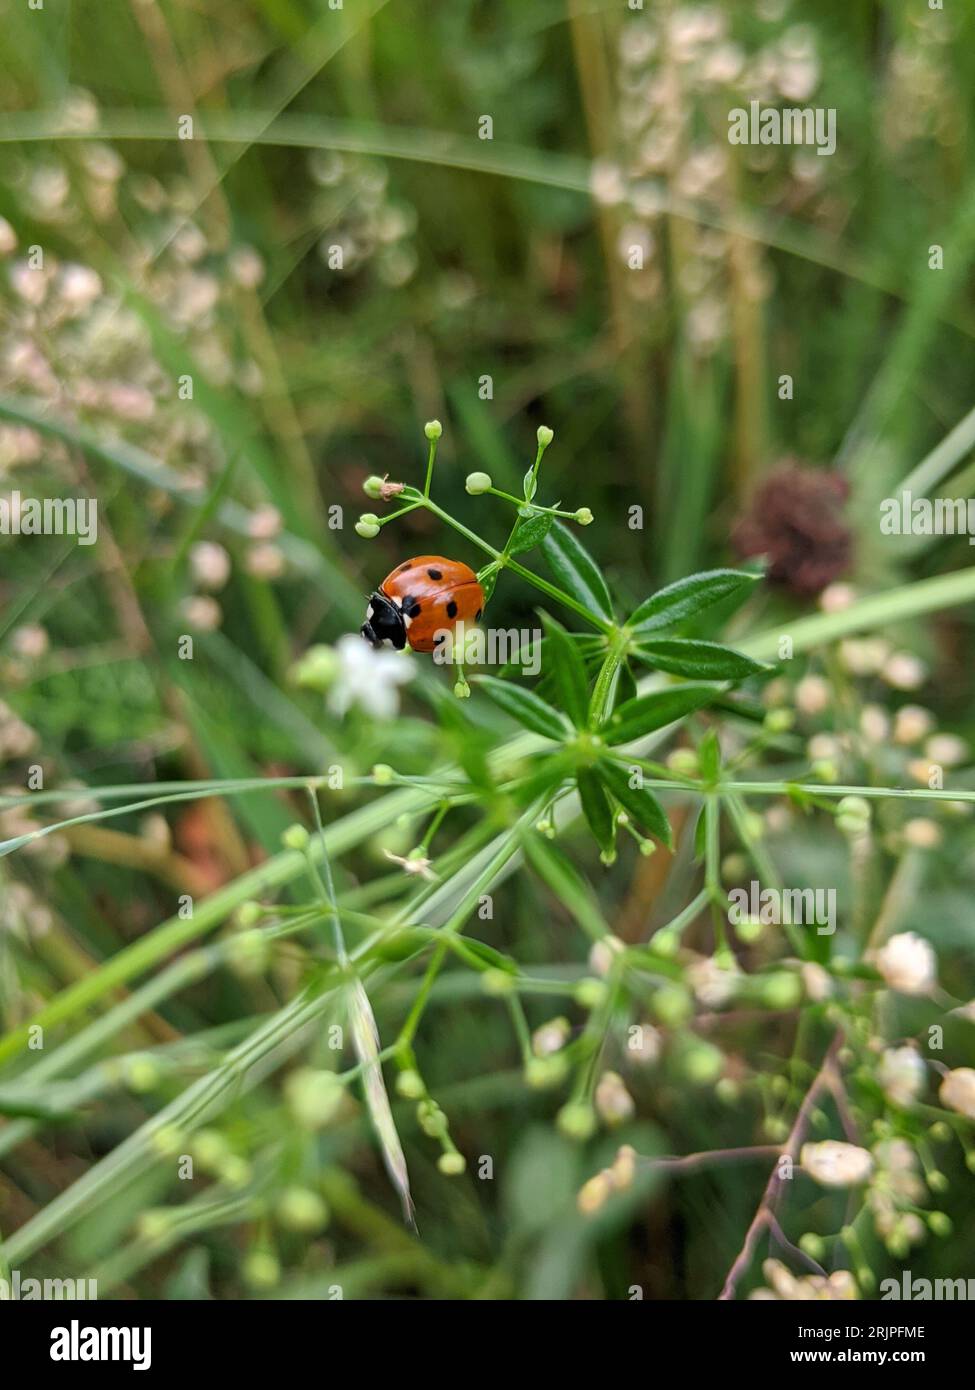 An adorable red ladybug standing on a green stem of delicate, pastel pink flowers Stock Photo